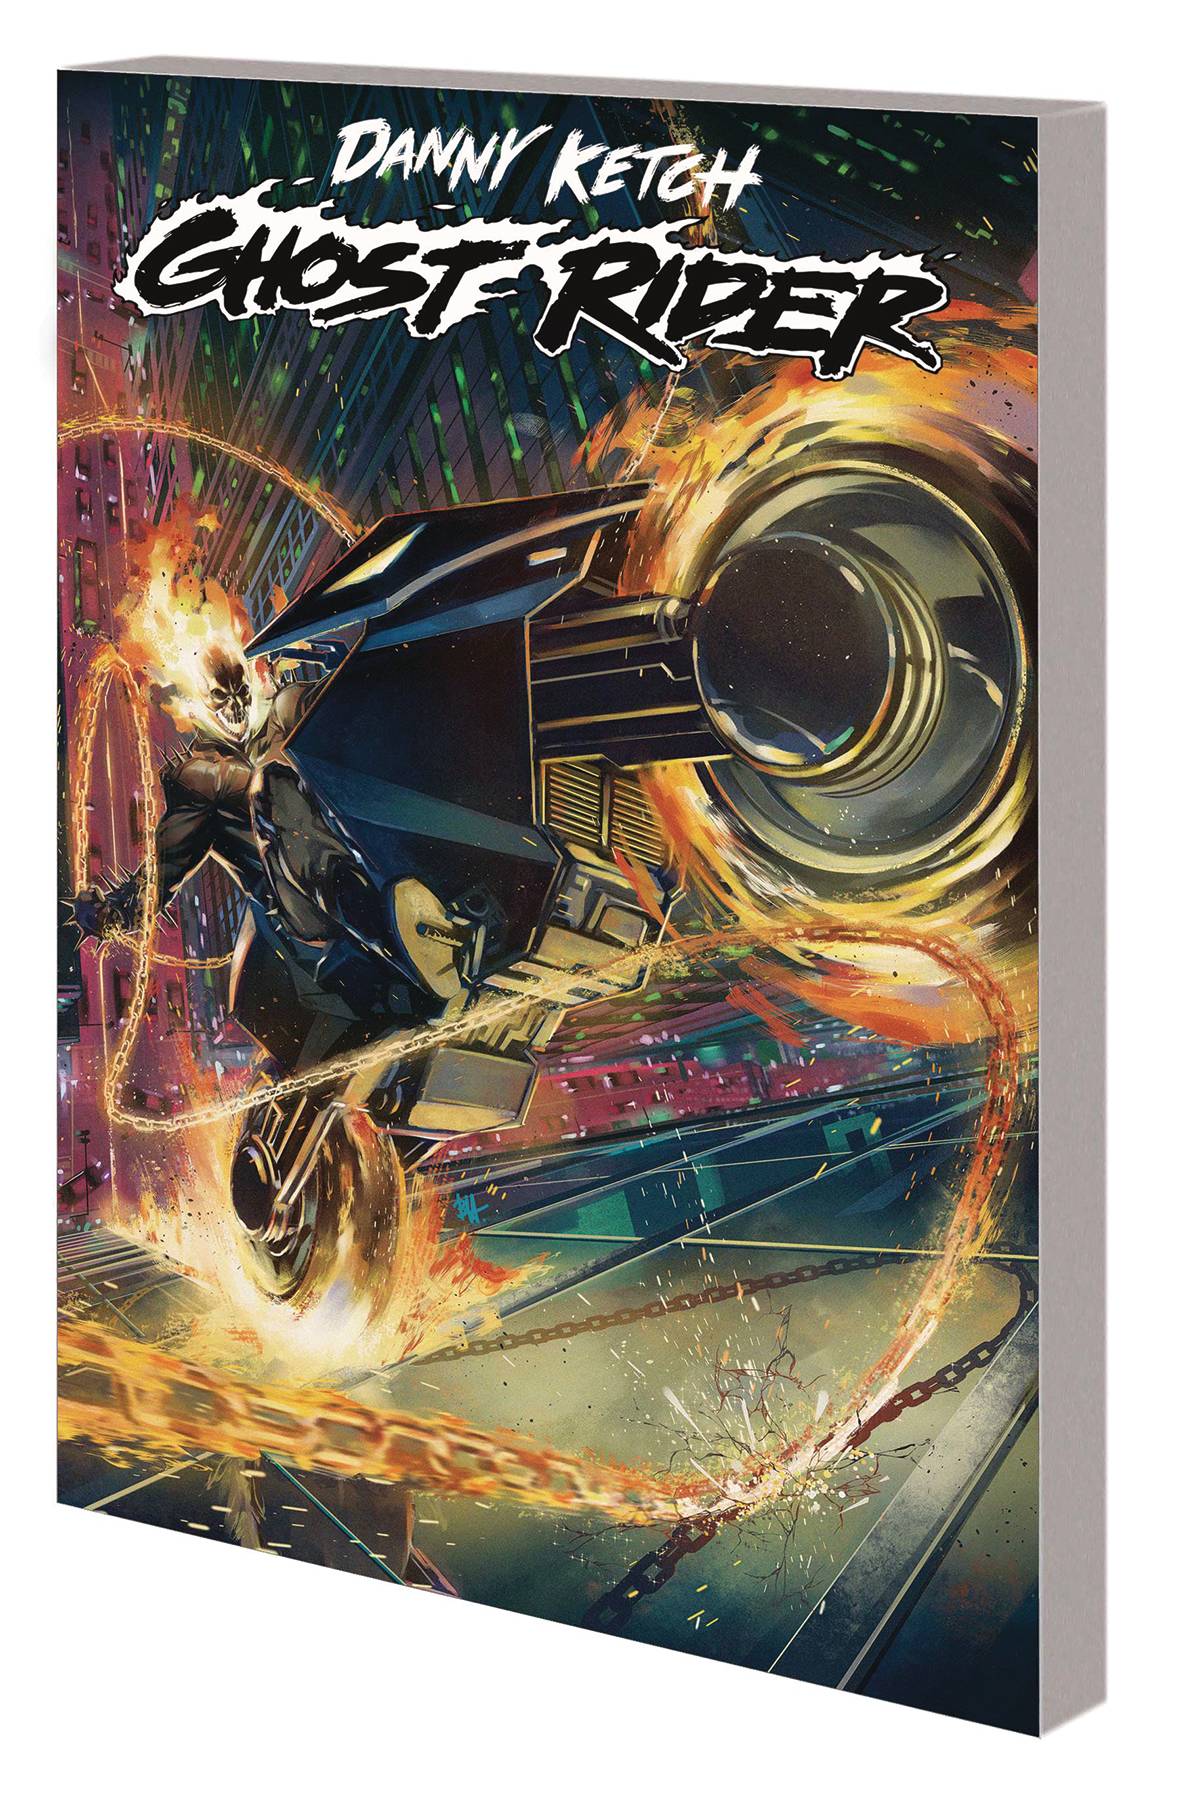 DANNY KETCH GHOST RIDER BLOOD & VENGEANCE TP